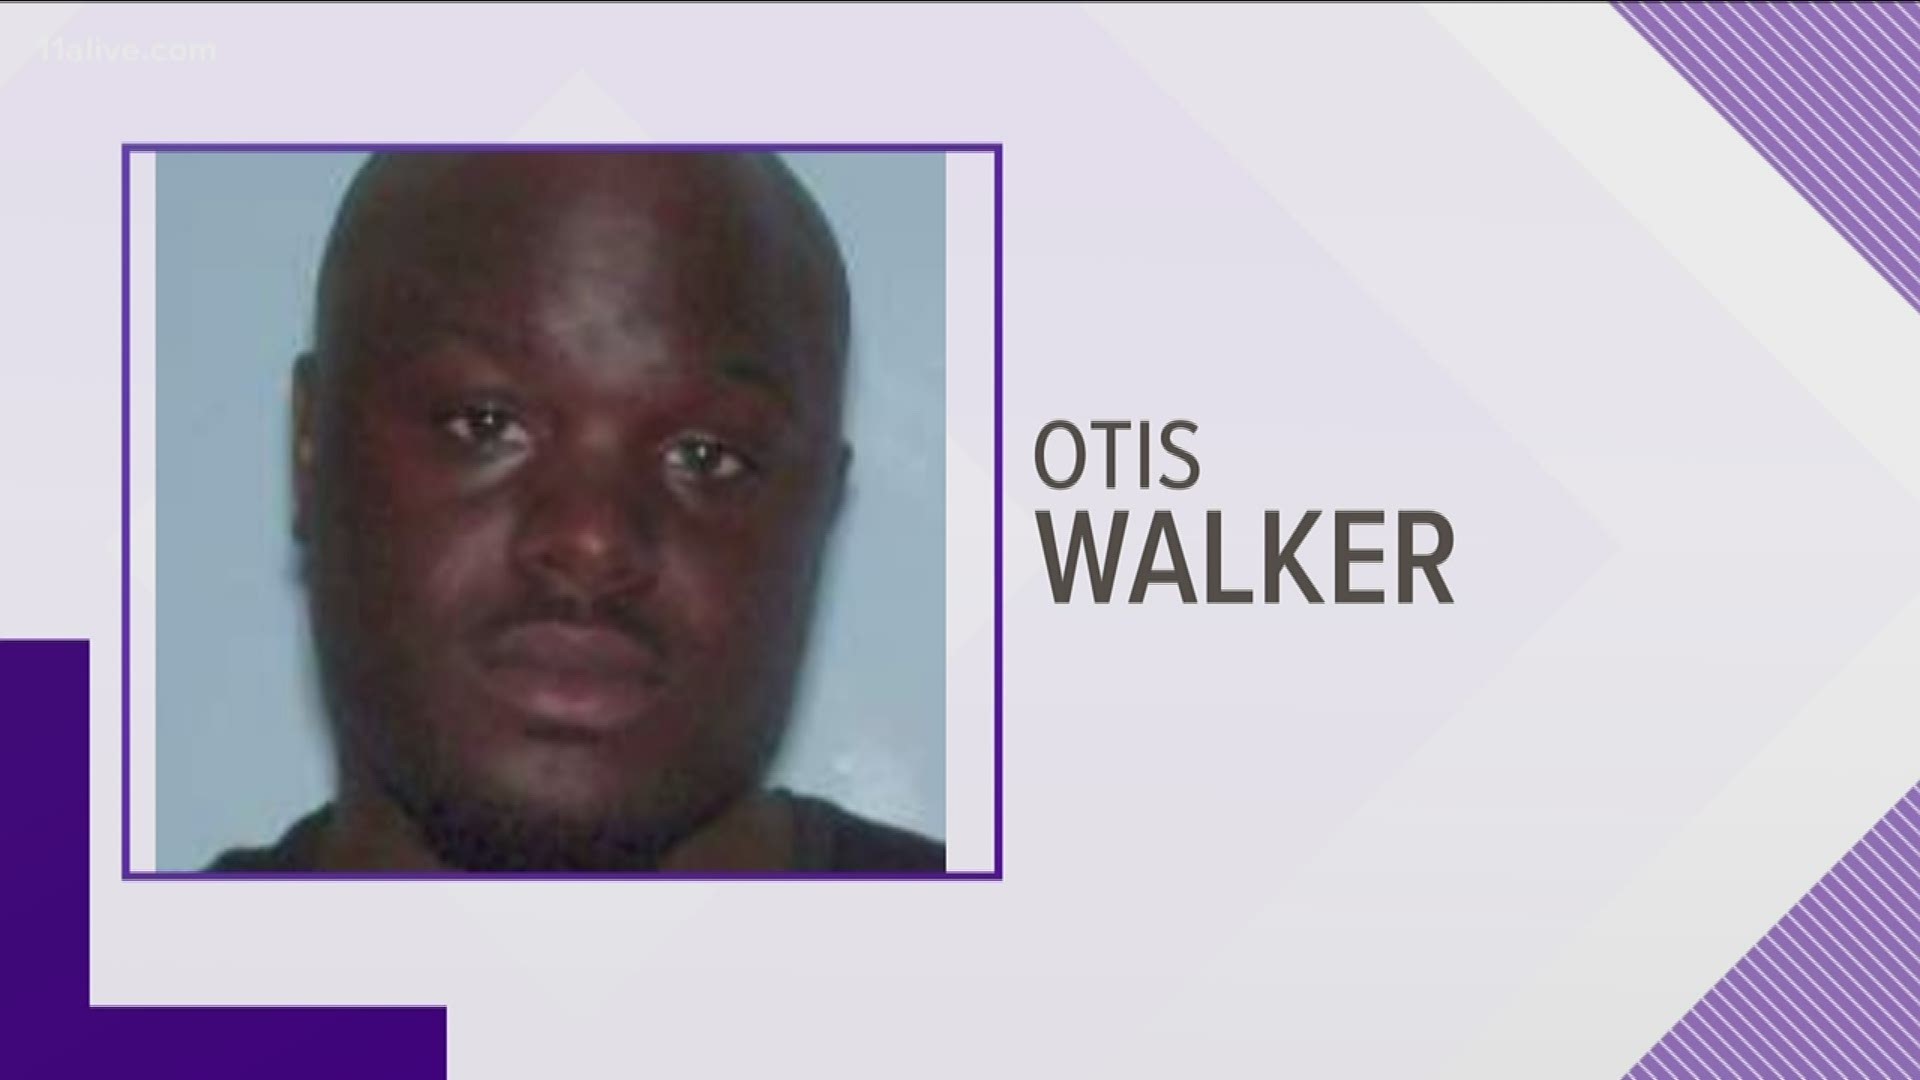 Officers are searching for Otis Walker, a man considered to be armed and dangerous.